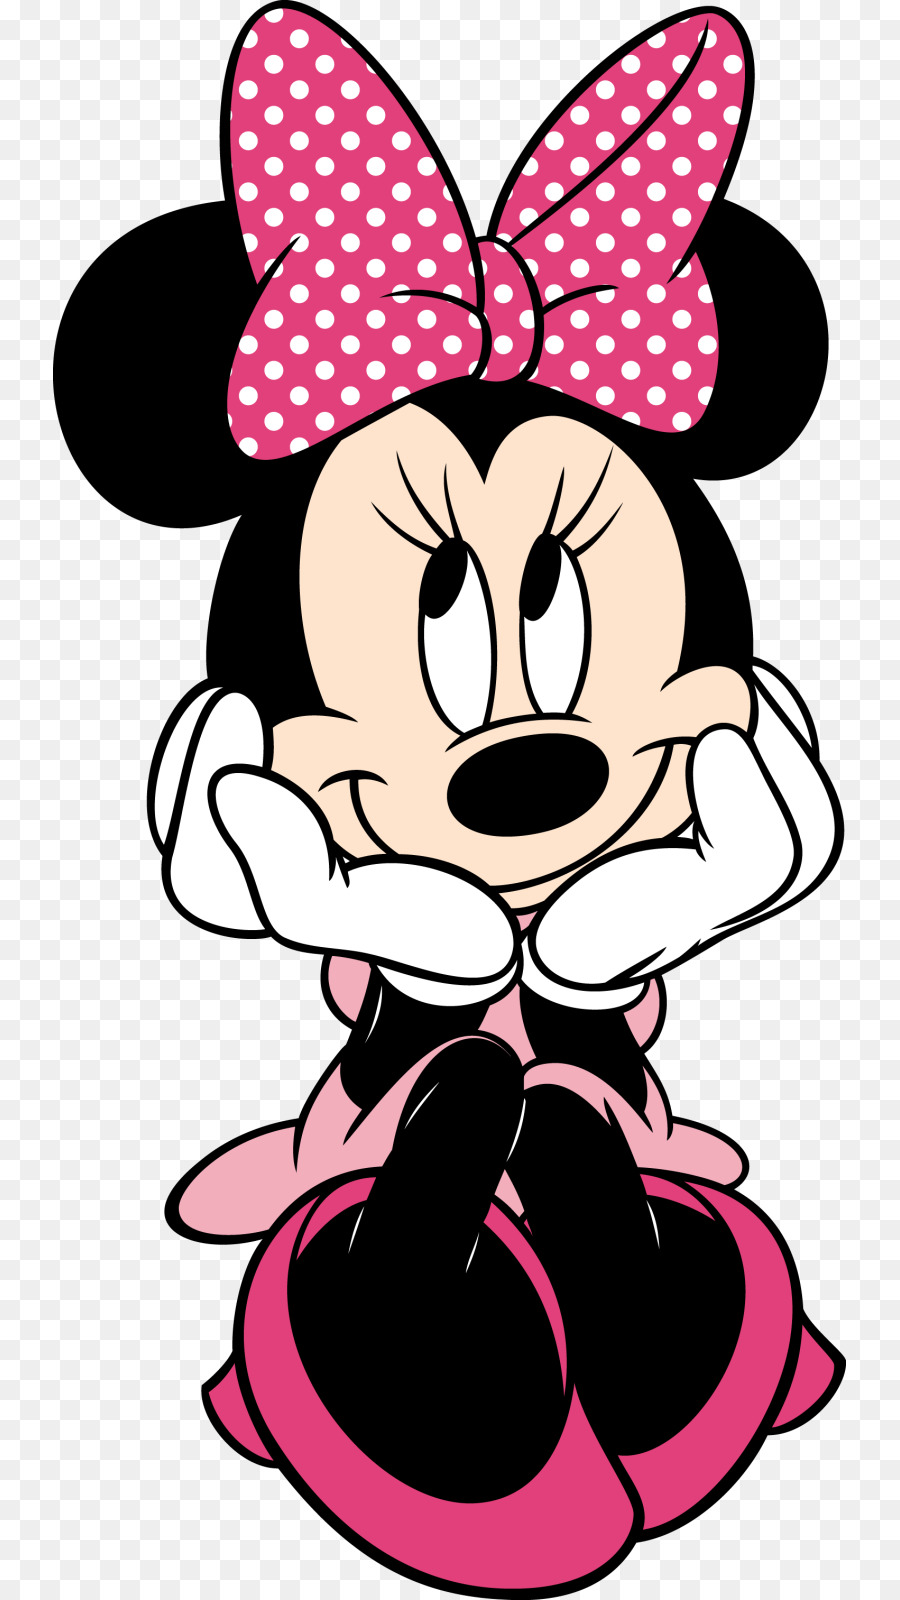 Minnie Mouse Mickey Mouse Clip art - Minnie Mouse PNG Free Download png download - 793*1600 - Free Transparent  png Download.